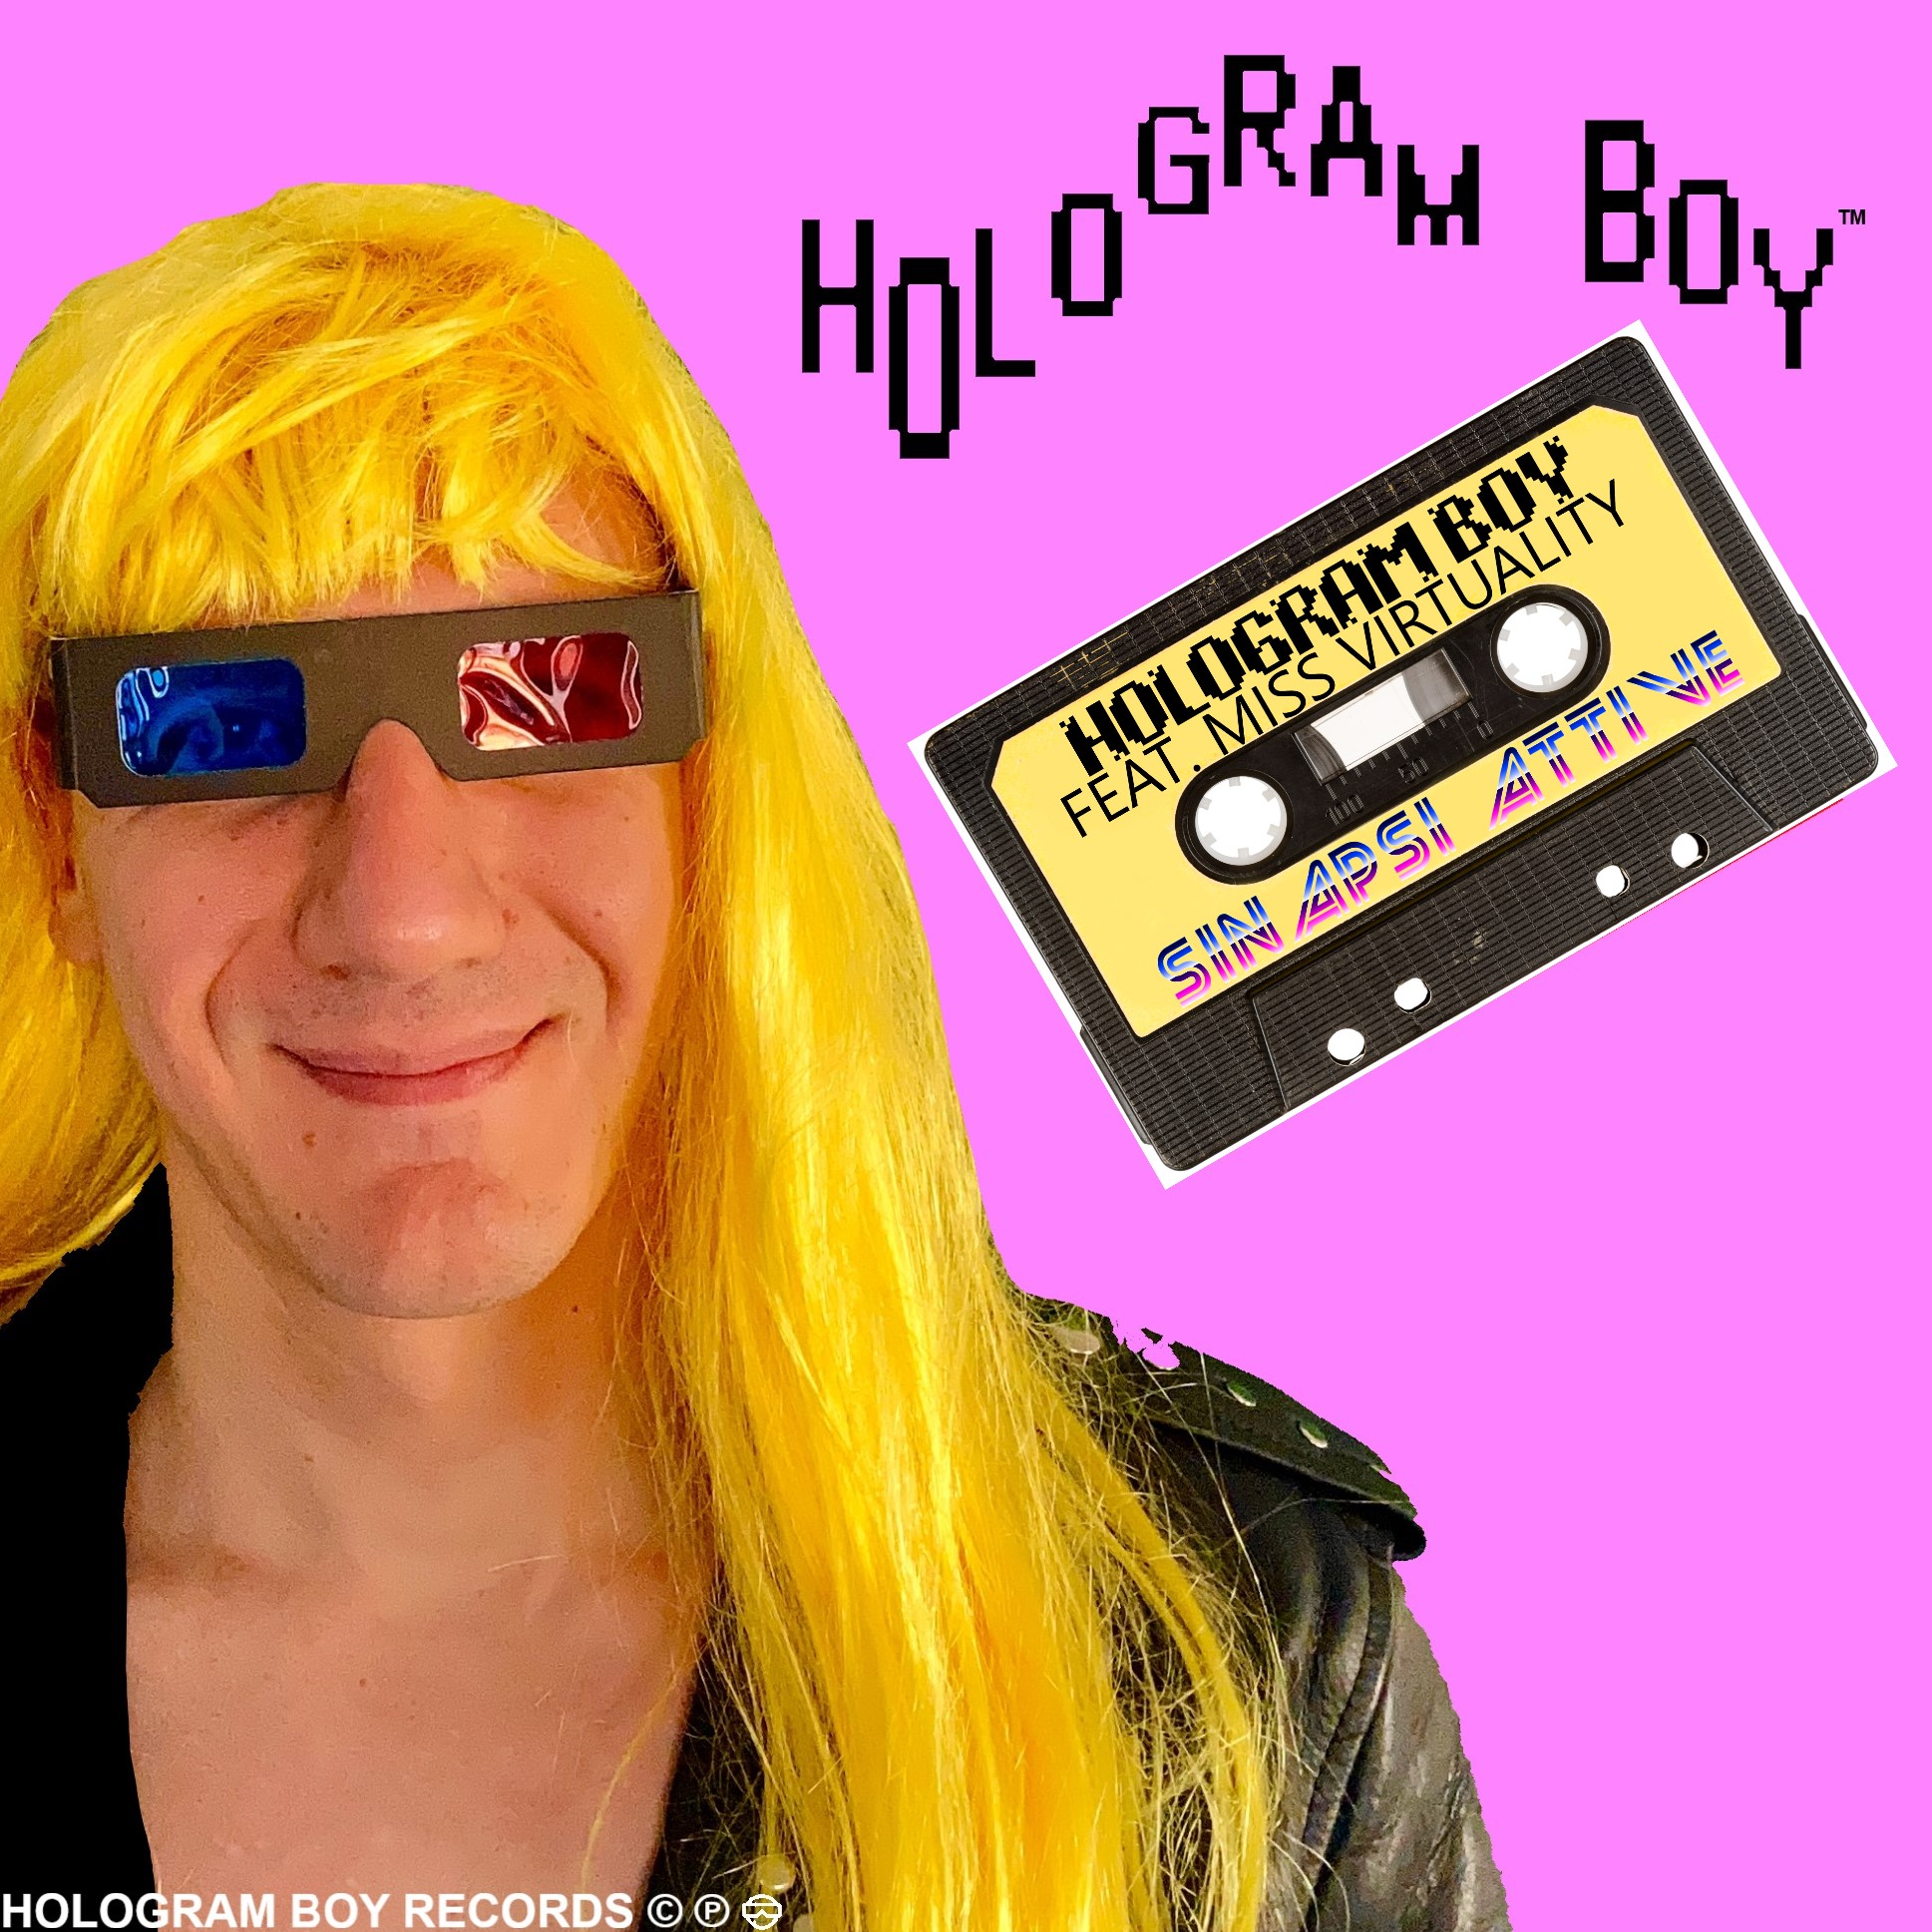 With a feeling of uneasiness typical of the suburbs of the Metaverse , HOLOGRAM BOY releases his first single “SINAPSI ATTIVE”